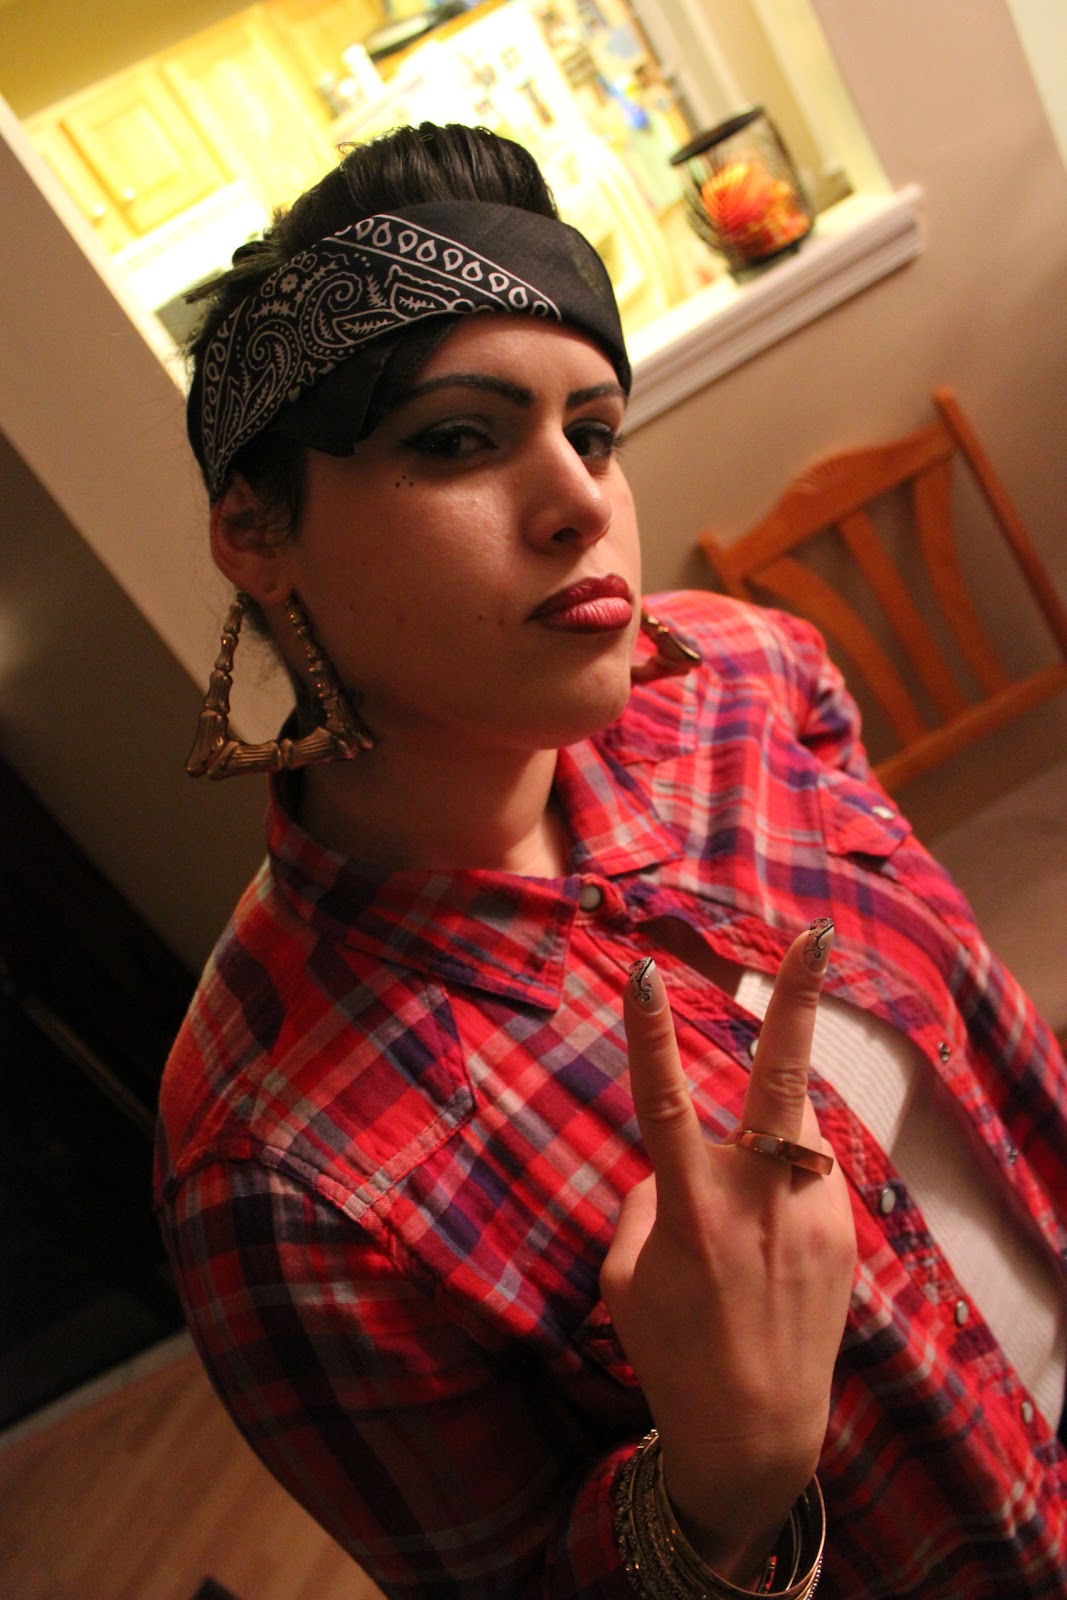 Halloween Costume Chola Porn - PooLovesBoo: Hope Your Halloween Was Happy